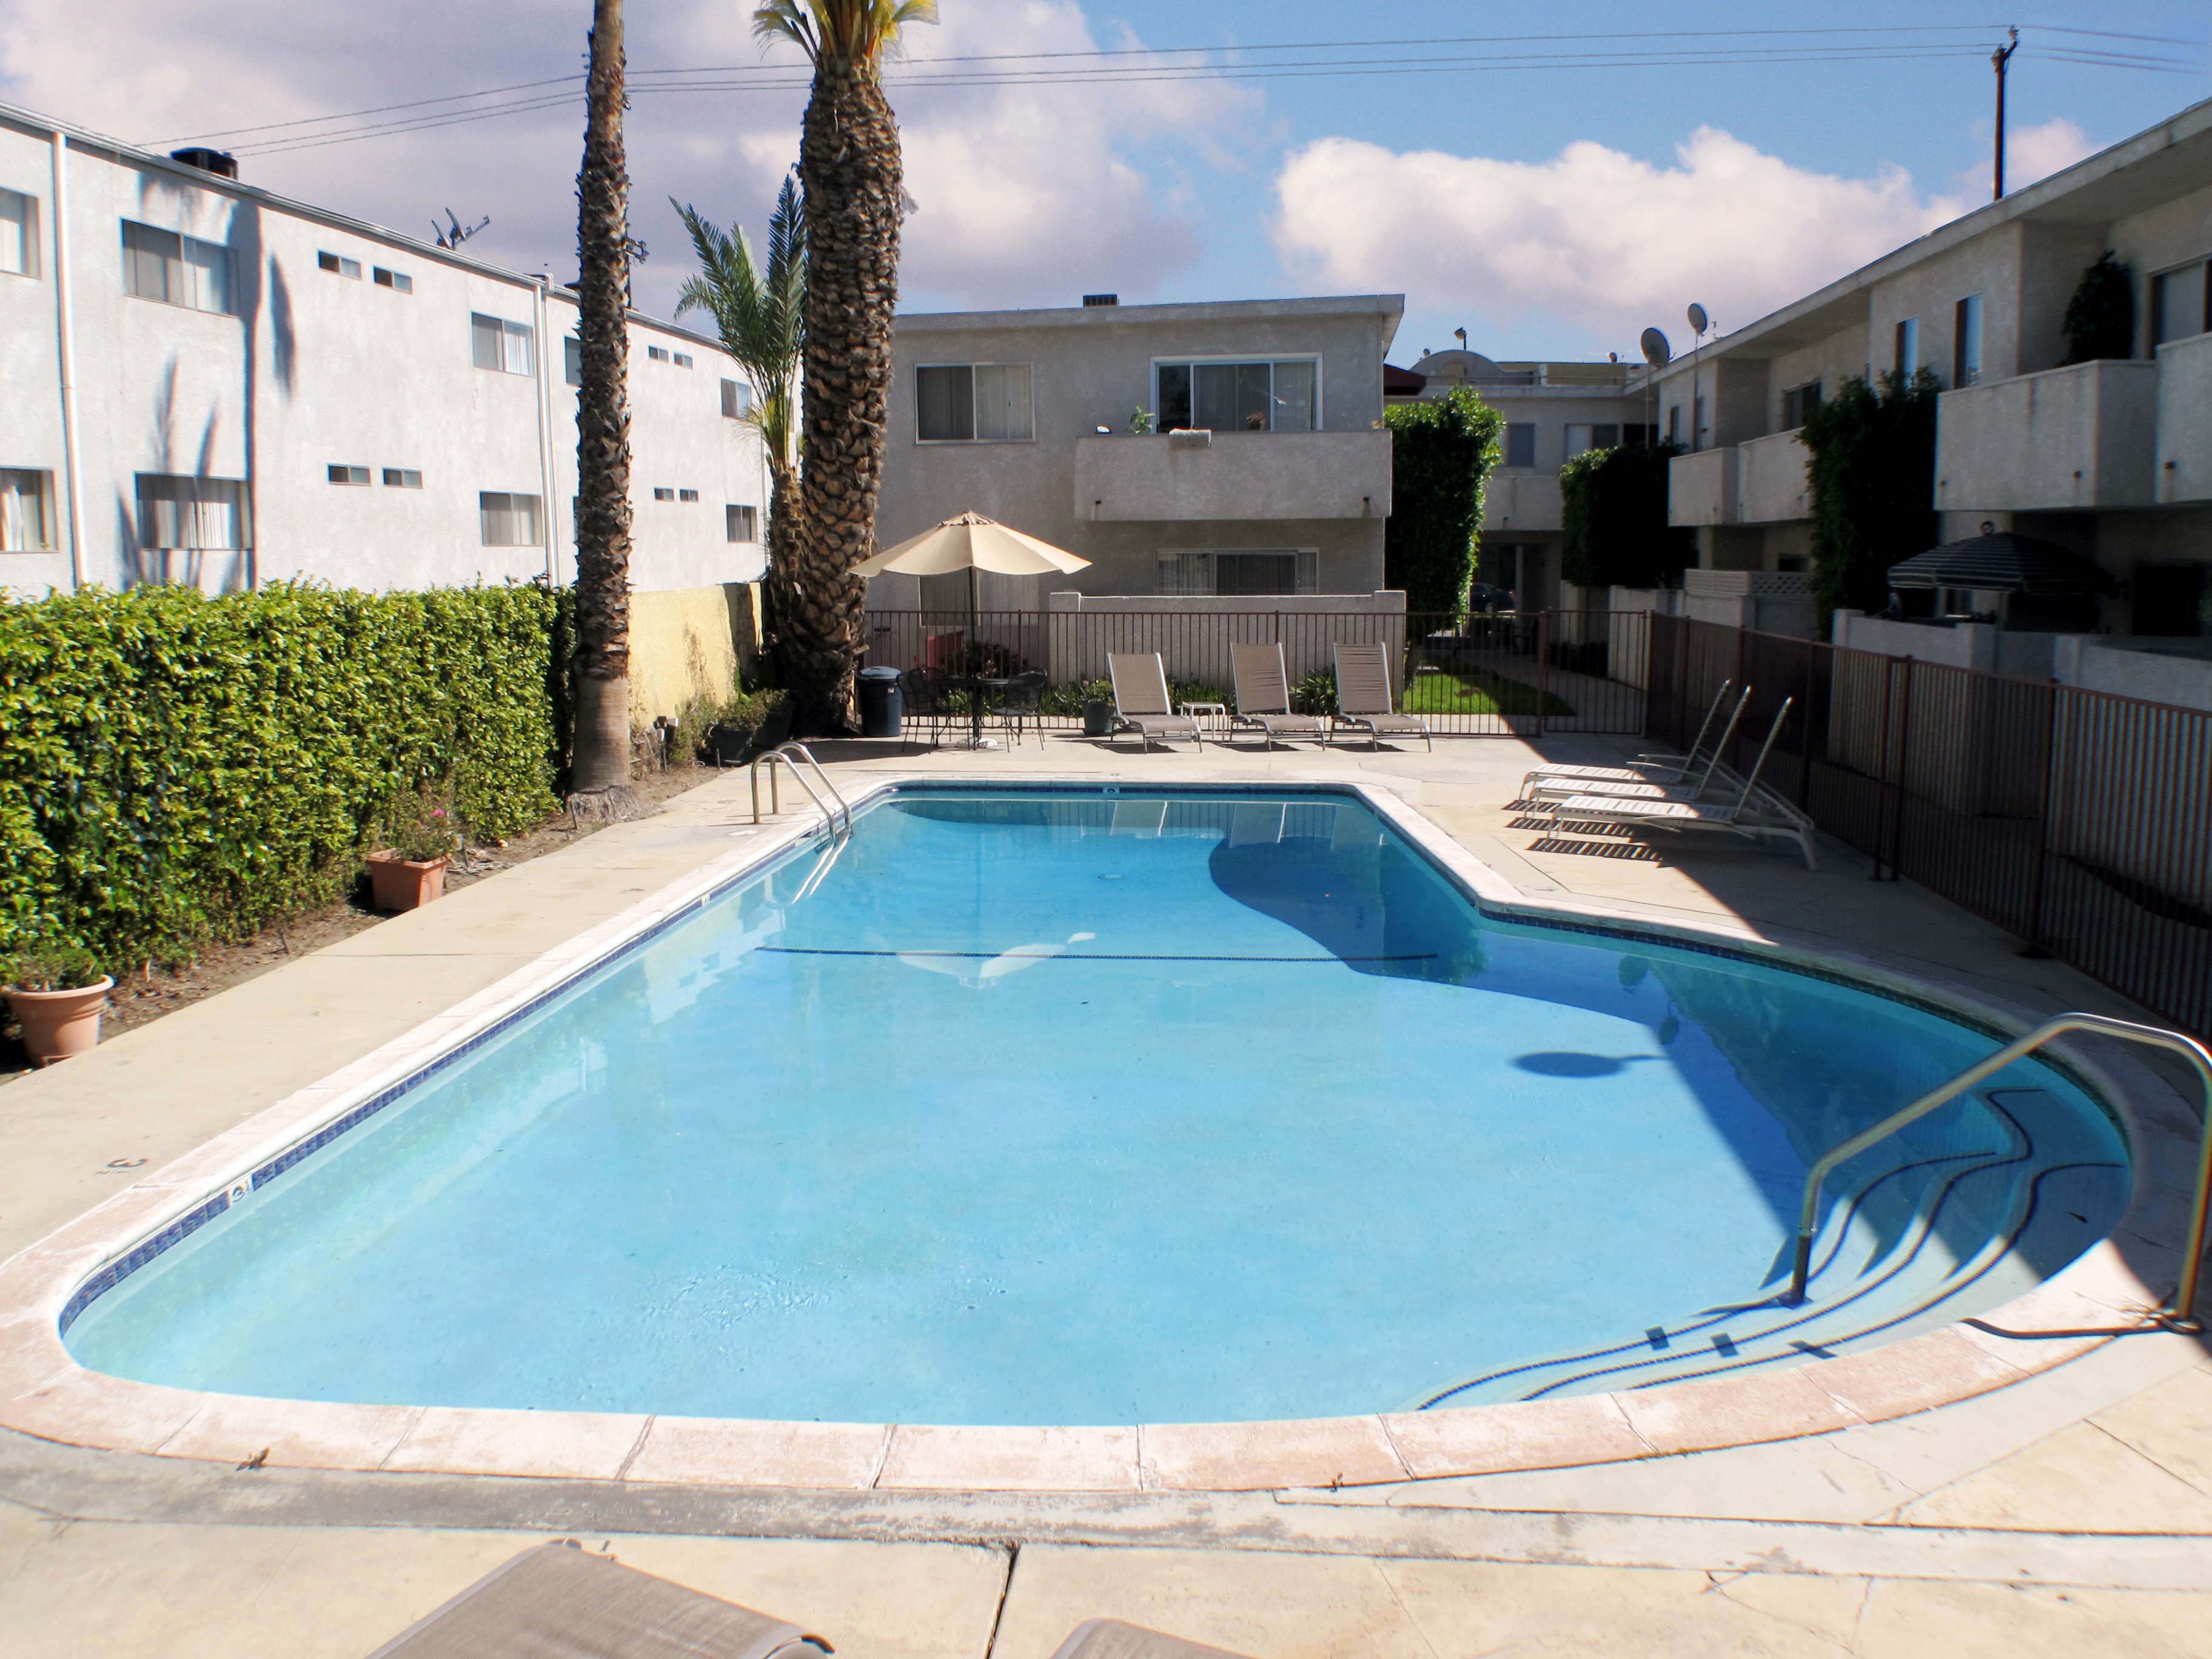 Outdoor pool with lounging chairs, a table with an umbrella, and a hedge on the side. Pool area is fenced. Pool is inside a two story white building.